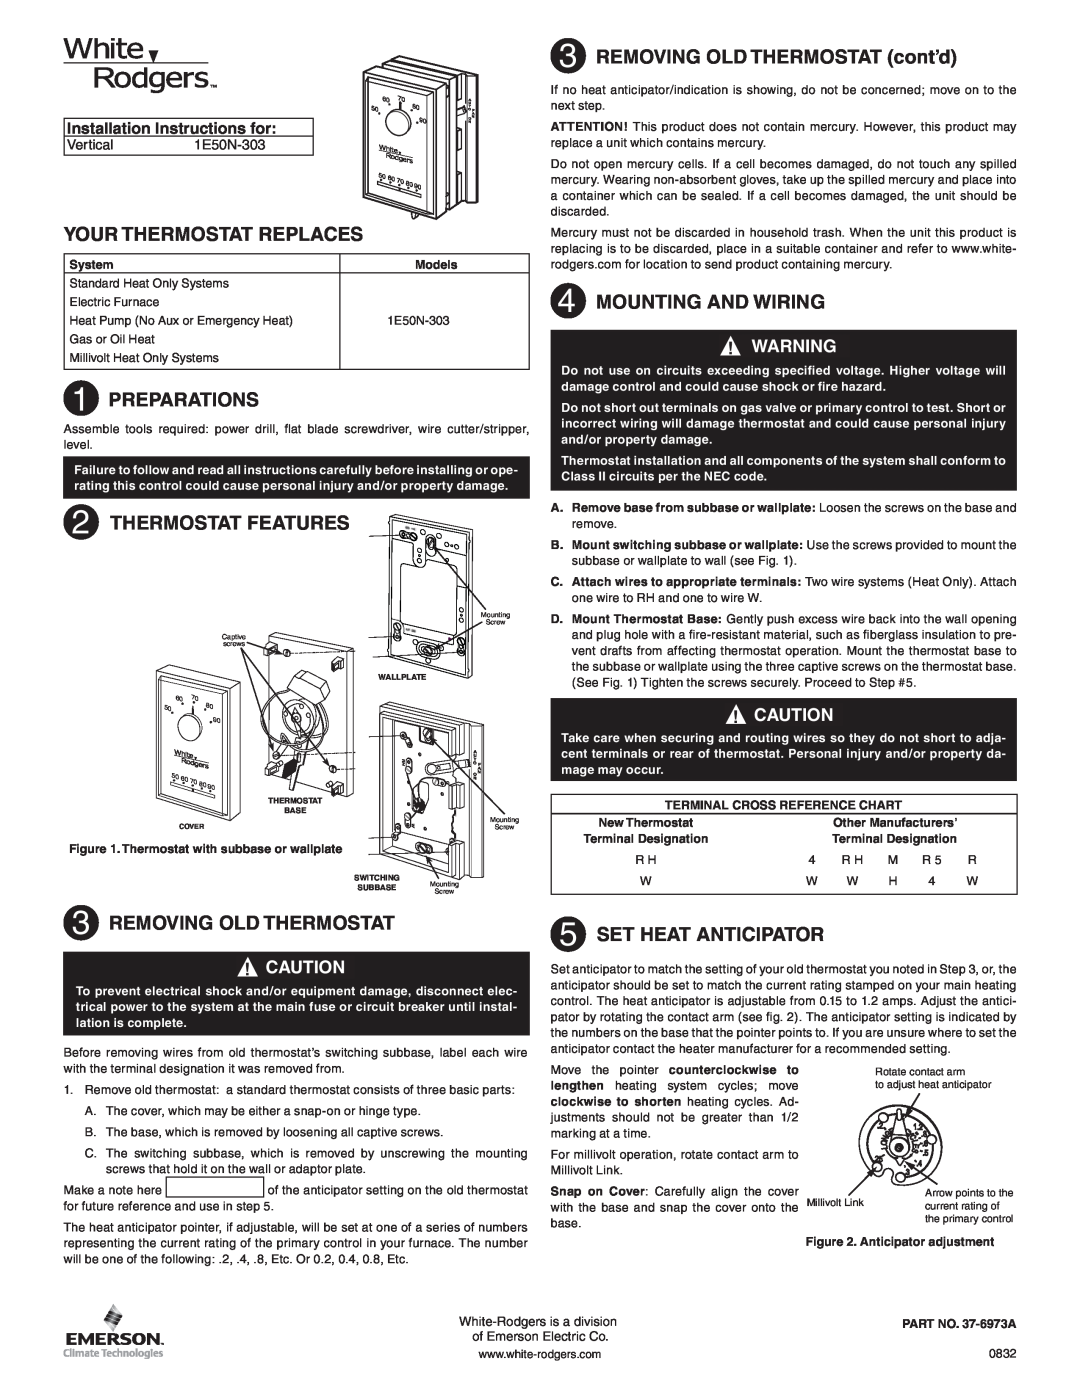 White Rodgers 1E50N-303 installation instructions Your Thermostat Replaces, Preparations, Thermostat Features 